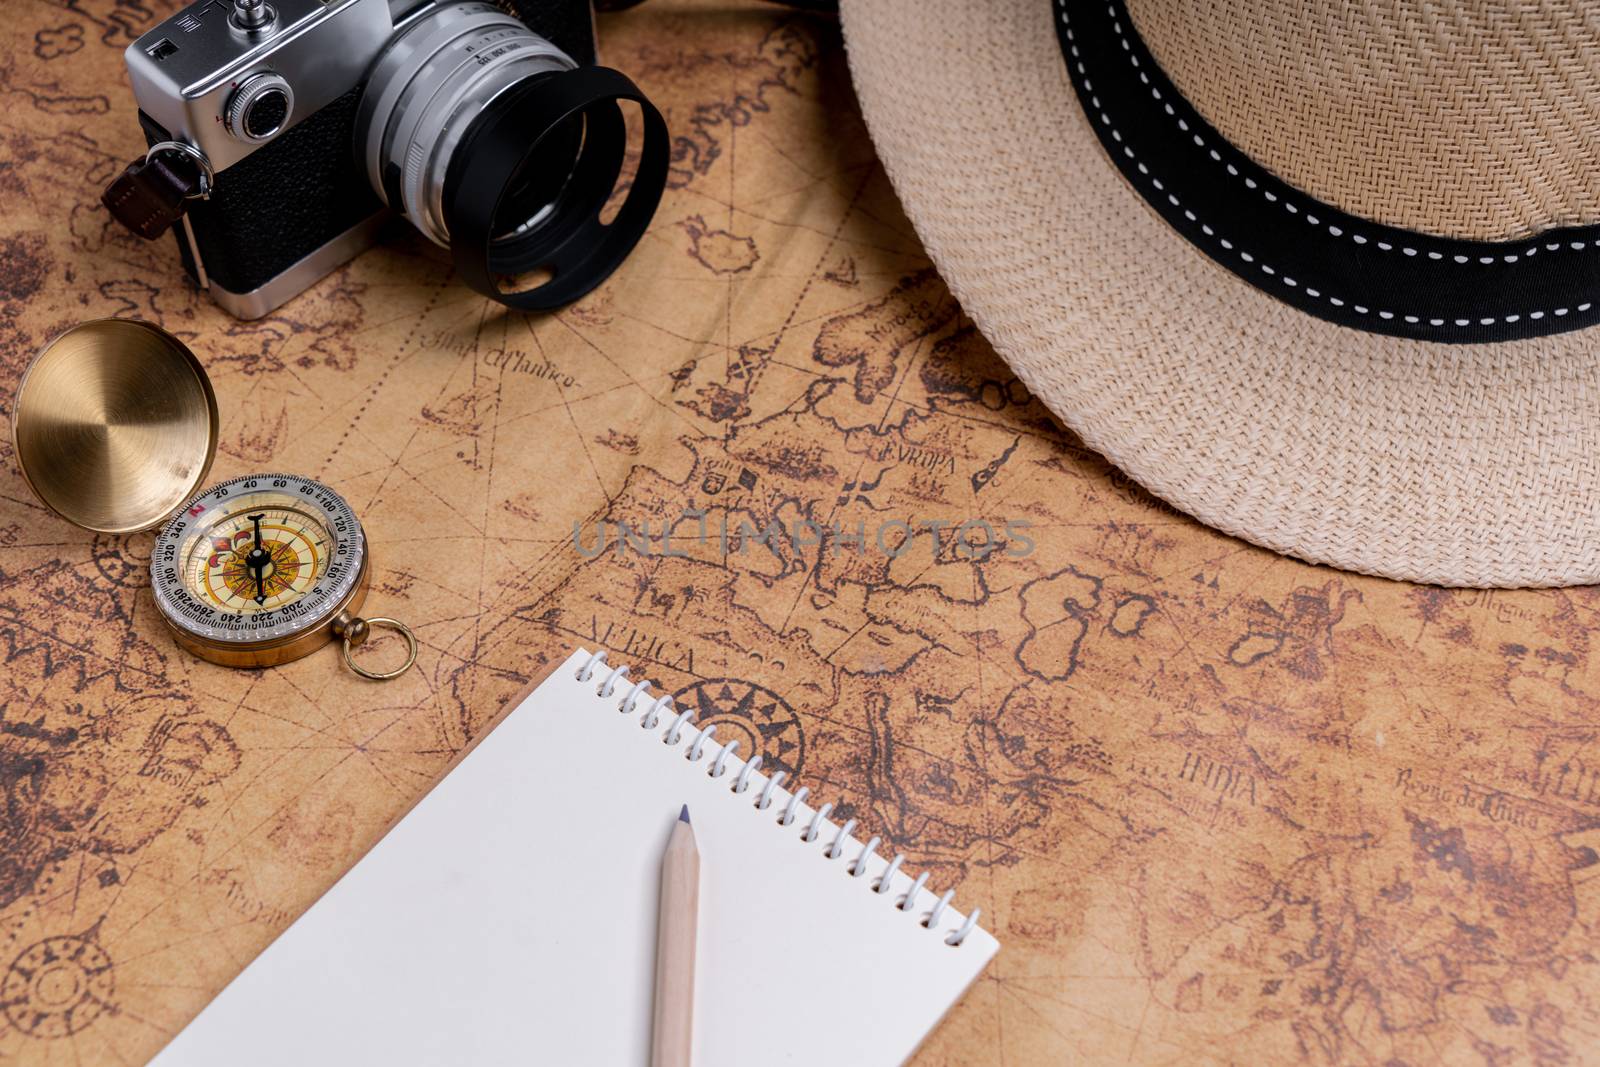 Compass and accessories on map for travel planning by Buttus_casso